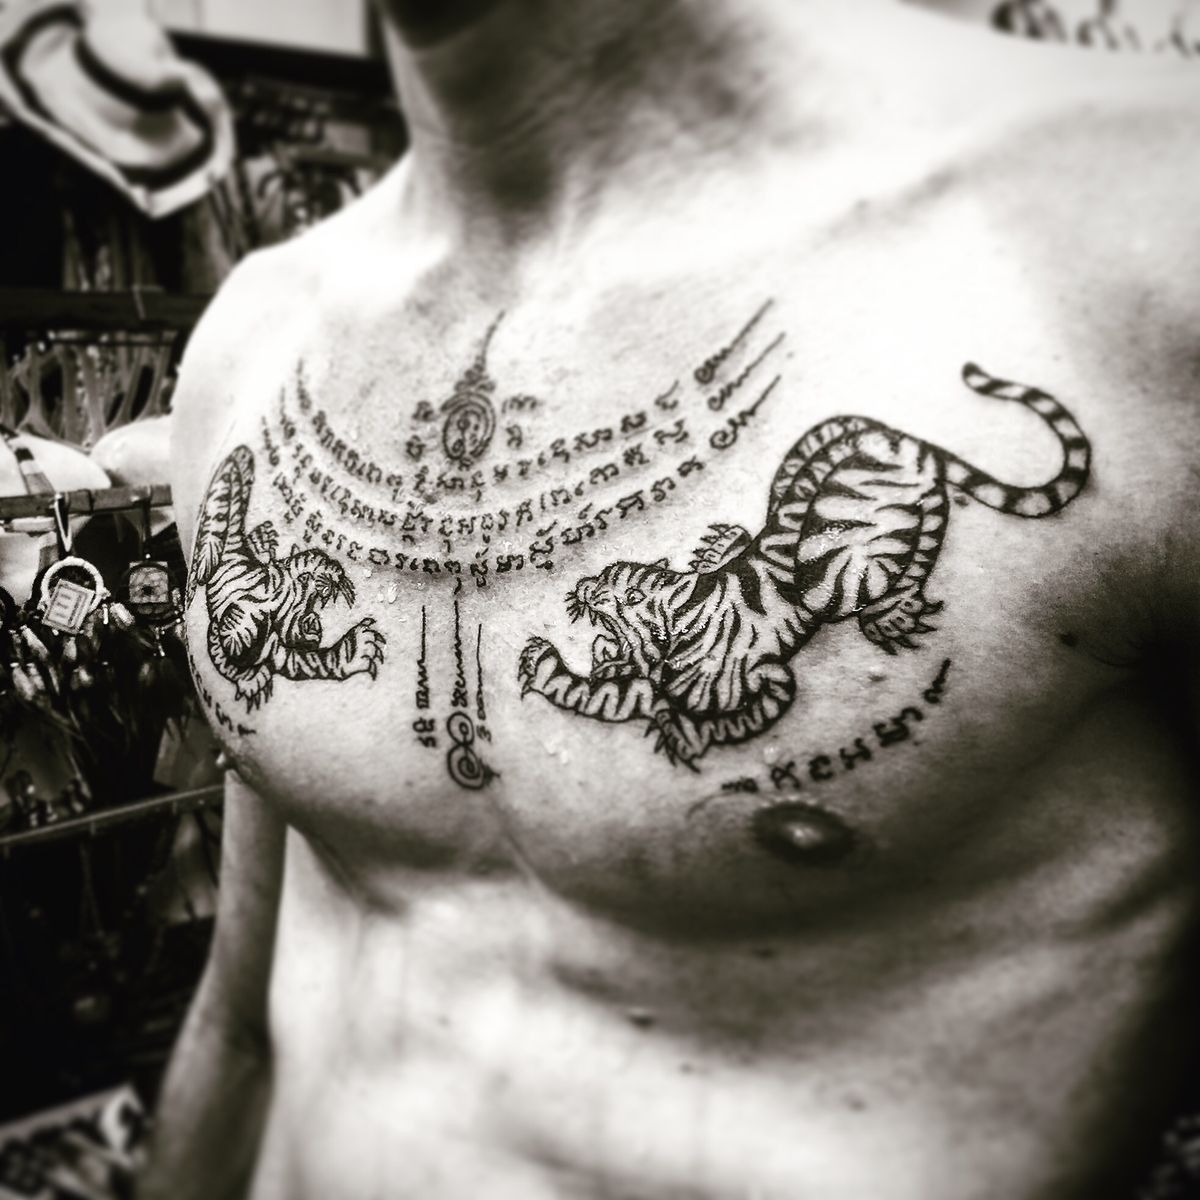 Muay thai tattoos and meanings